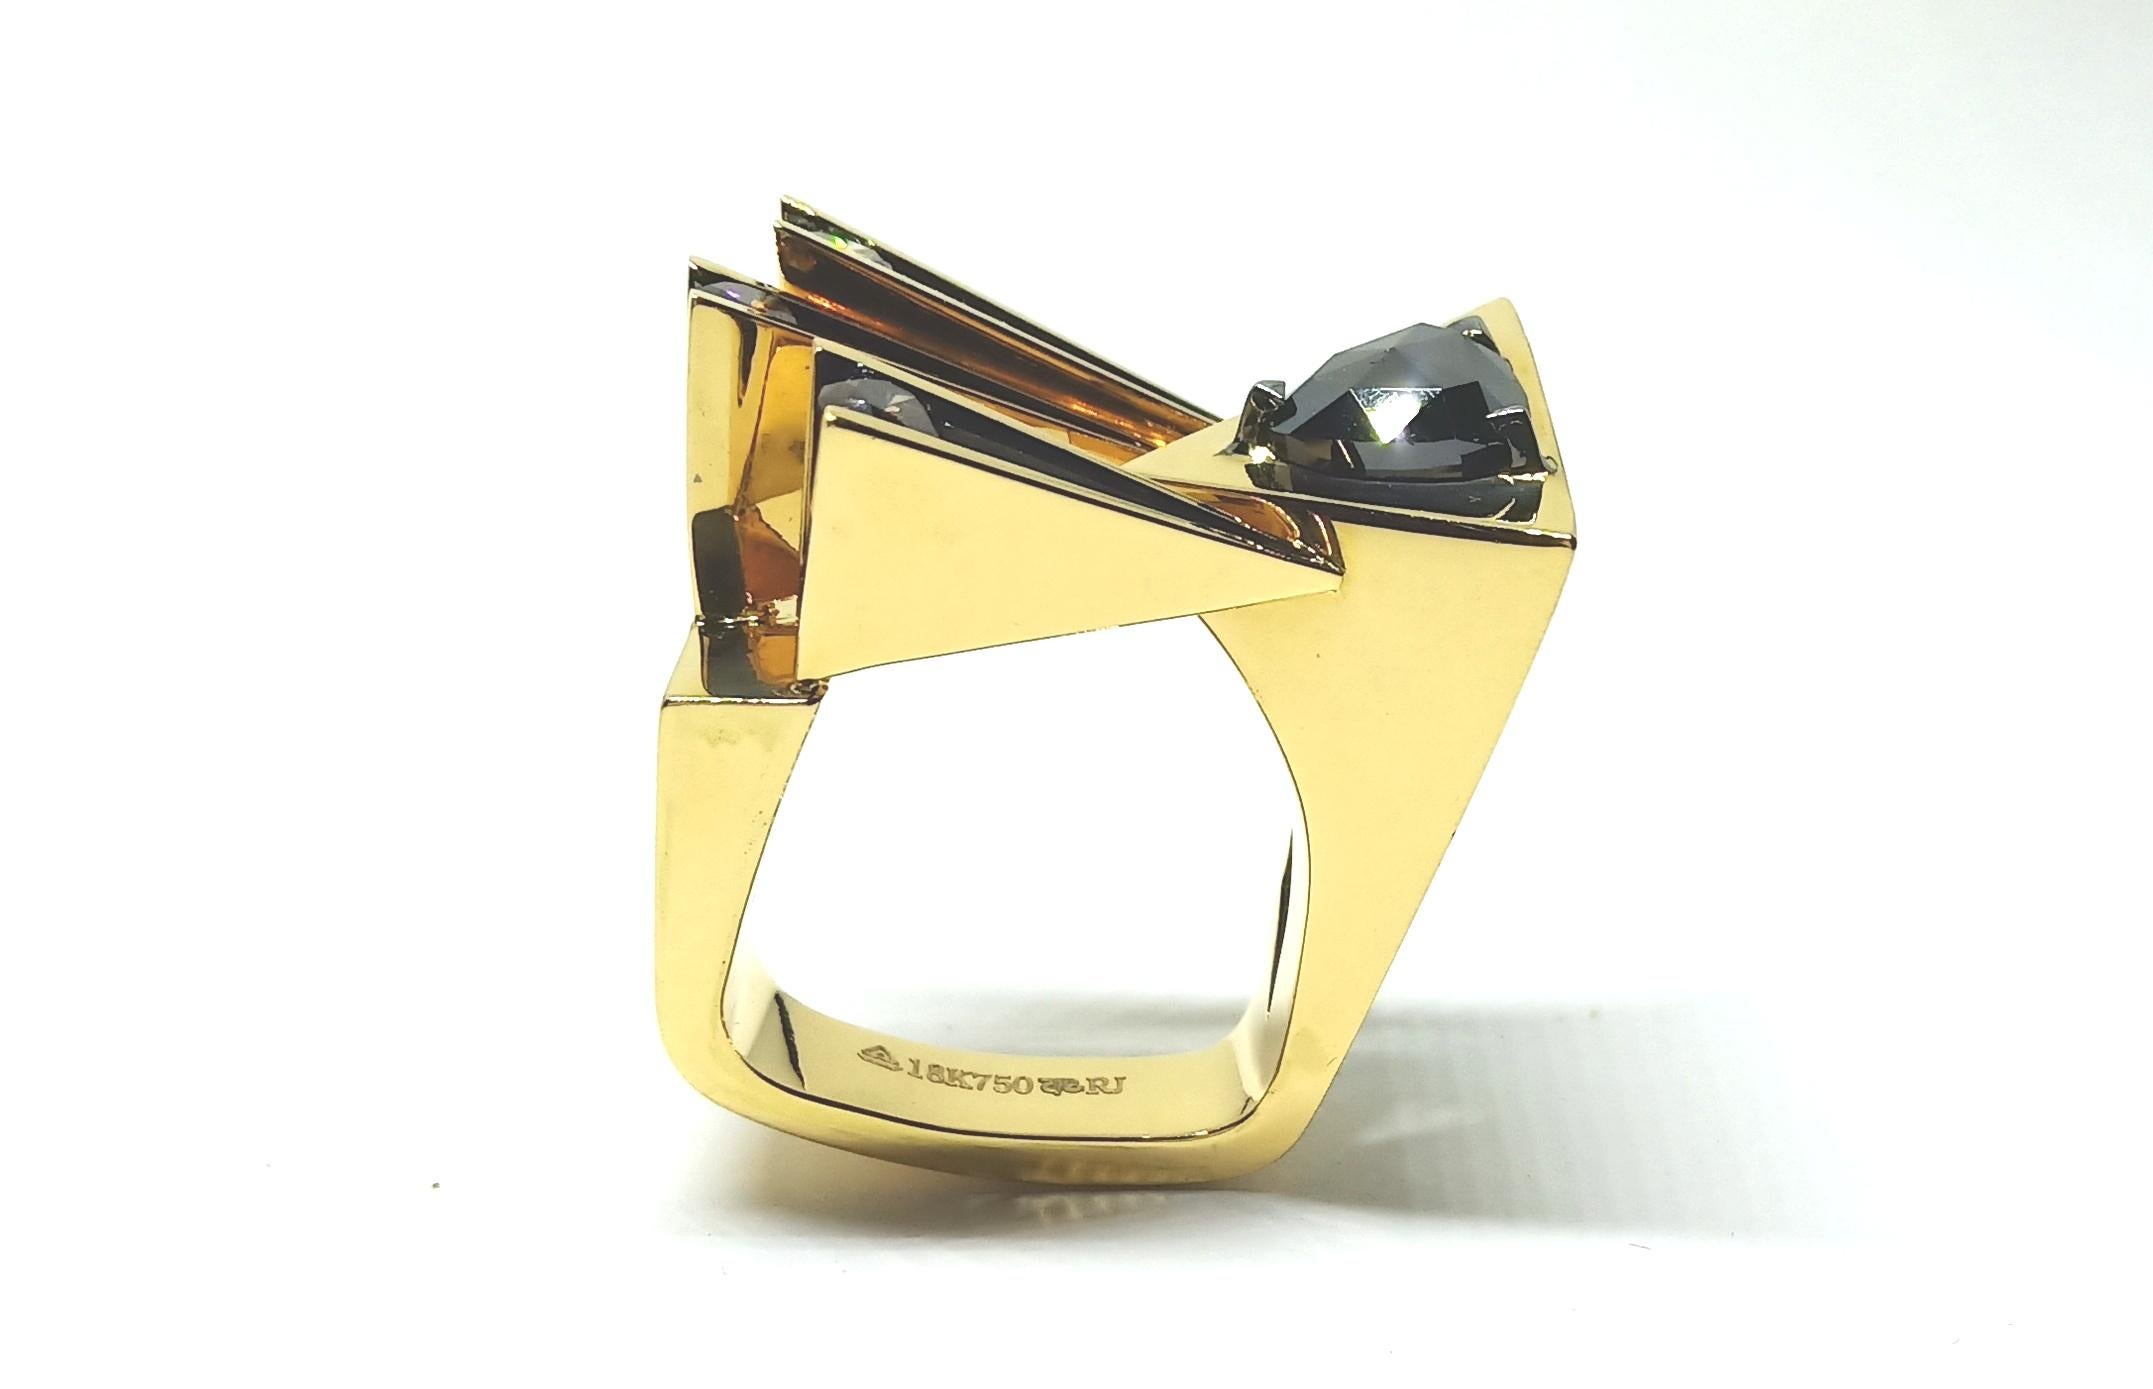 Contemporary One Of a Kind Round Brown and Black Rose Cut Diamond 18 Karat Gold Fashion Ring For Sale